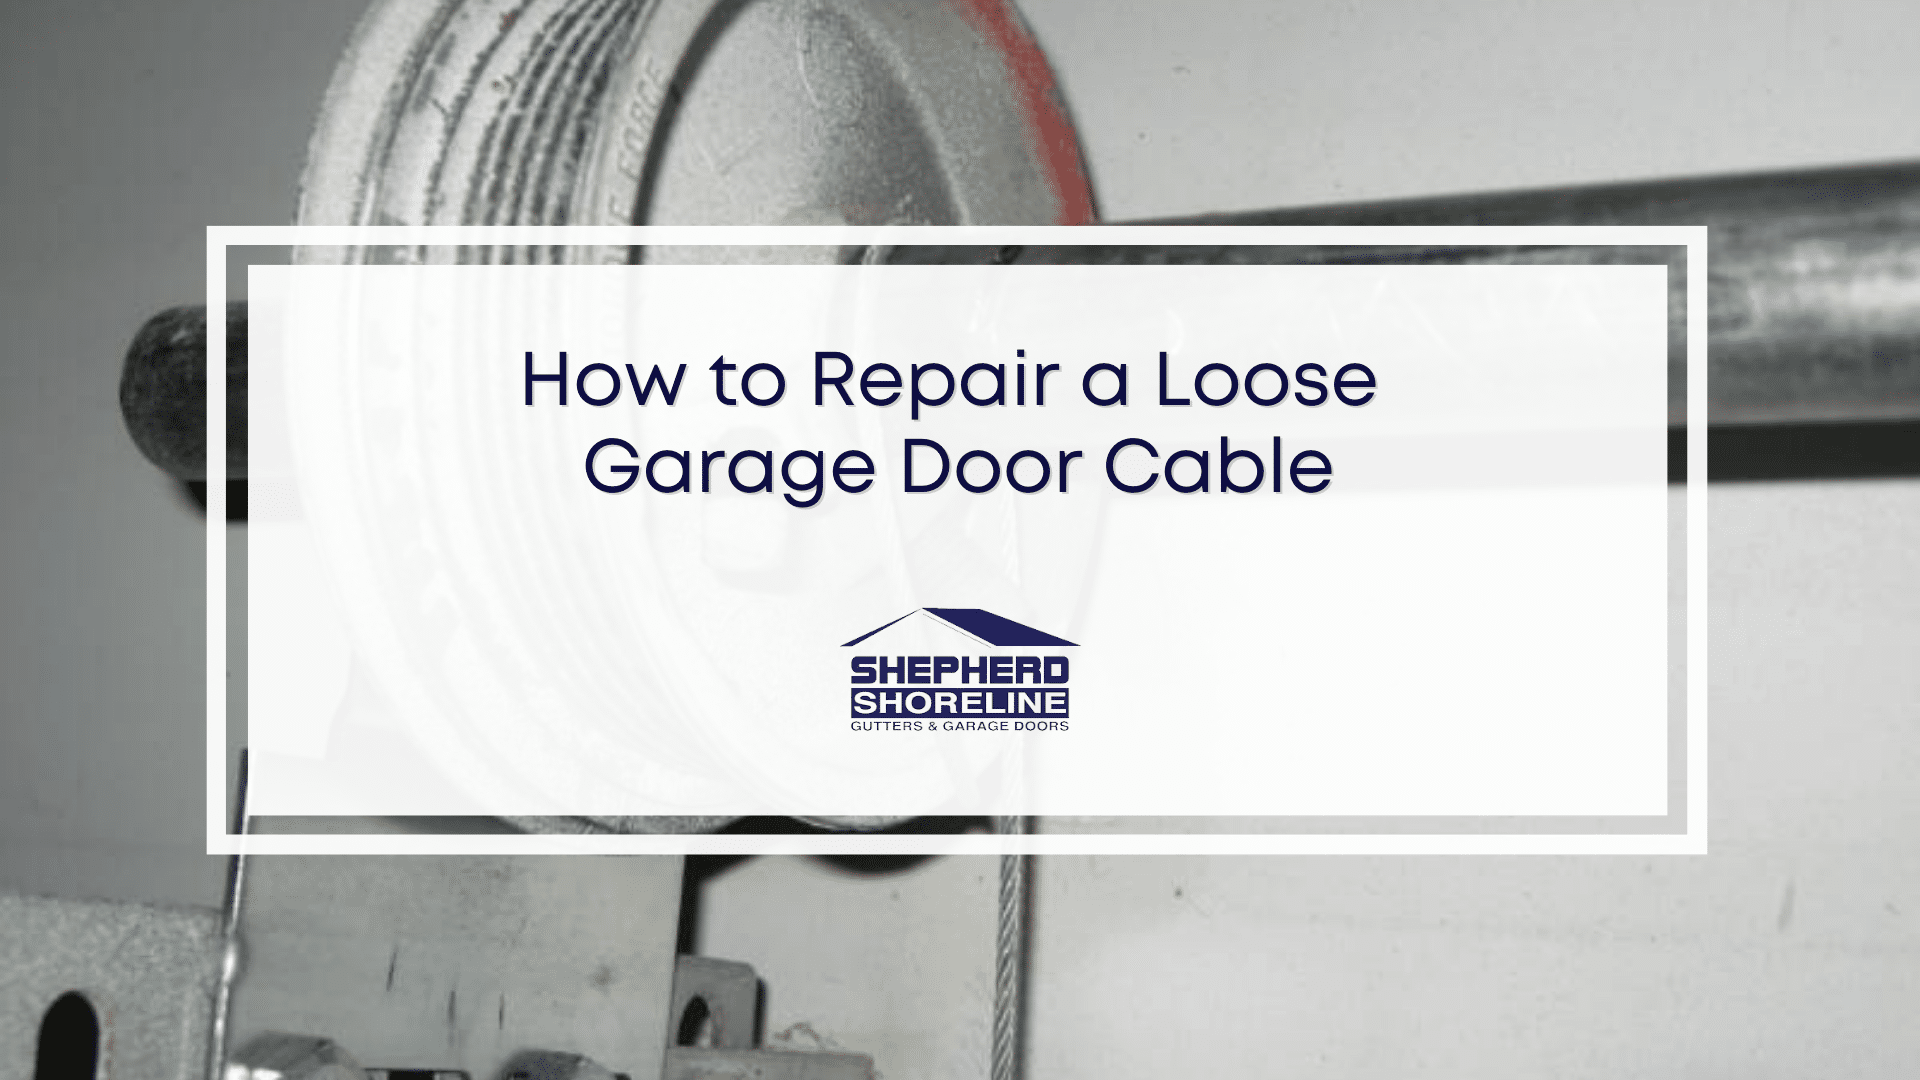 Featured image of how to repair a loose garage door cable